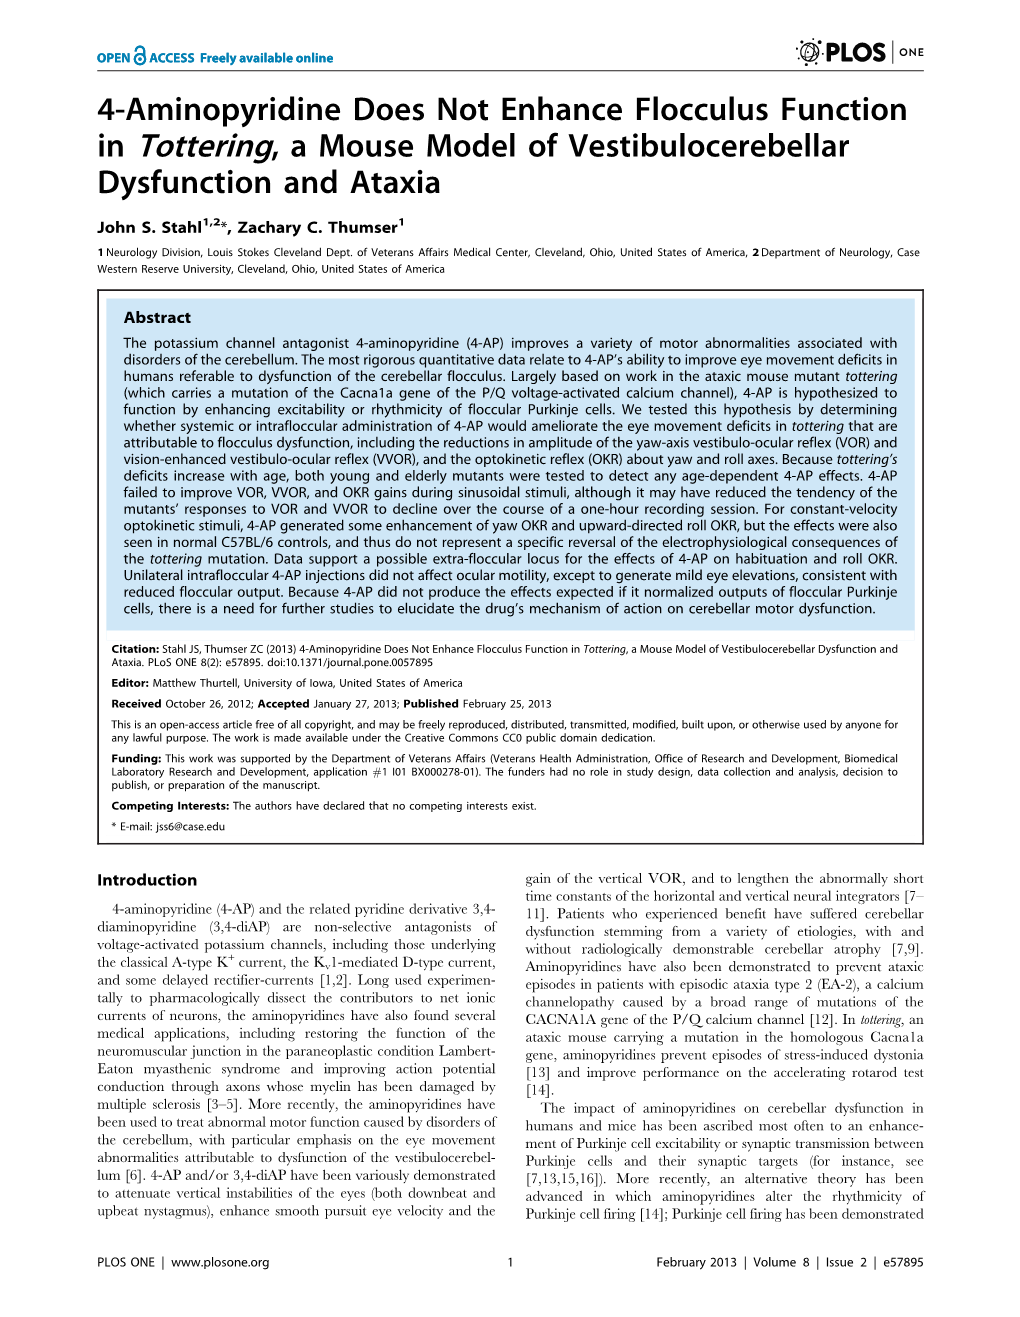 4-Aminopyridine Does Not Enhance Flocculus Function in Tottering, a Mouse Model of Vestibulocerebellar Dysfunction and Ataxia